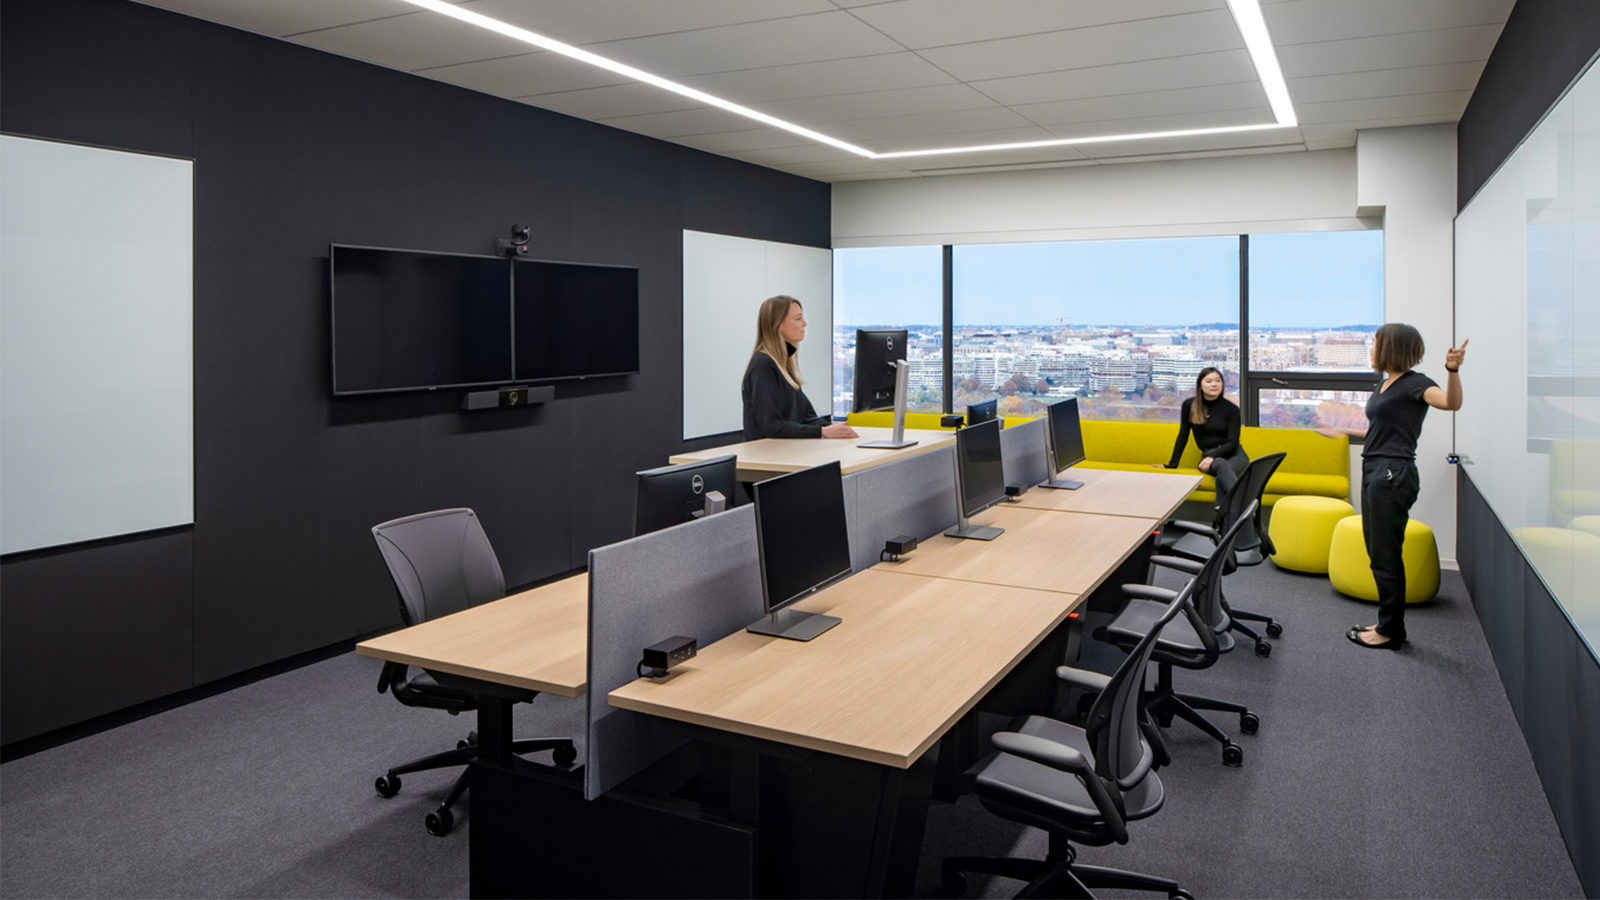 Yext's offices feature many spaces for collaboration.